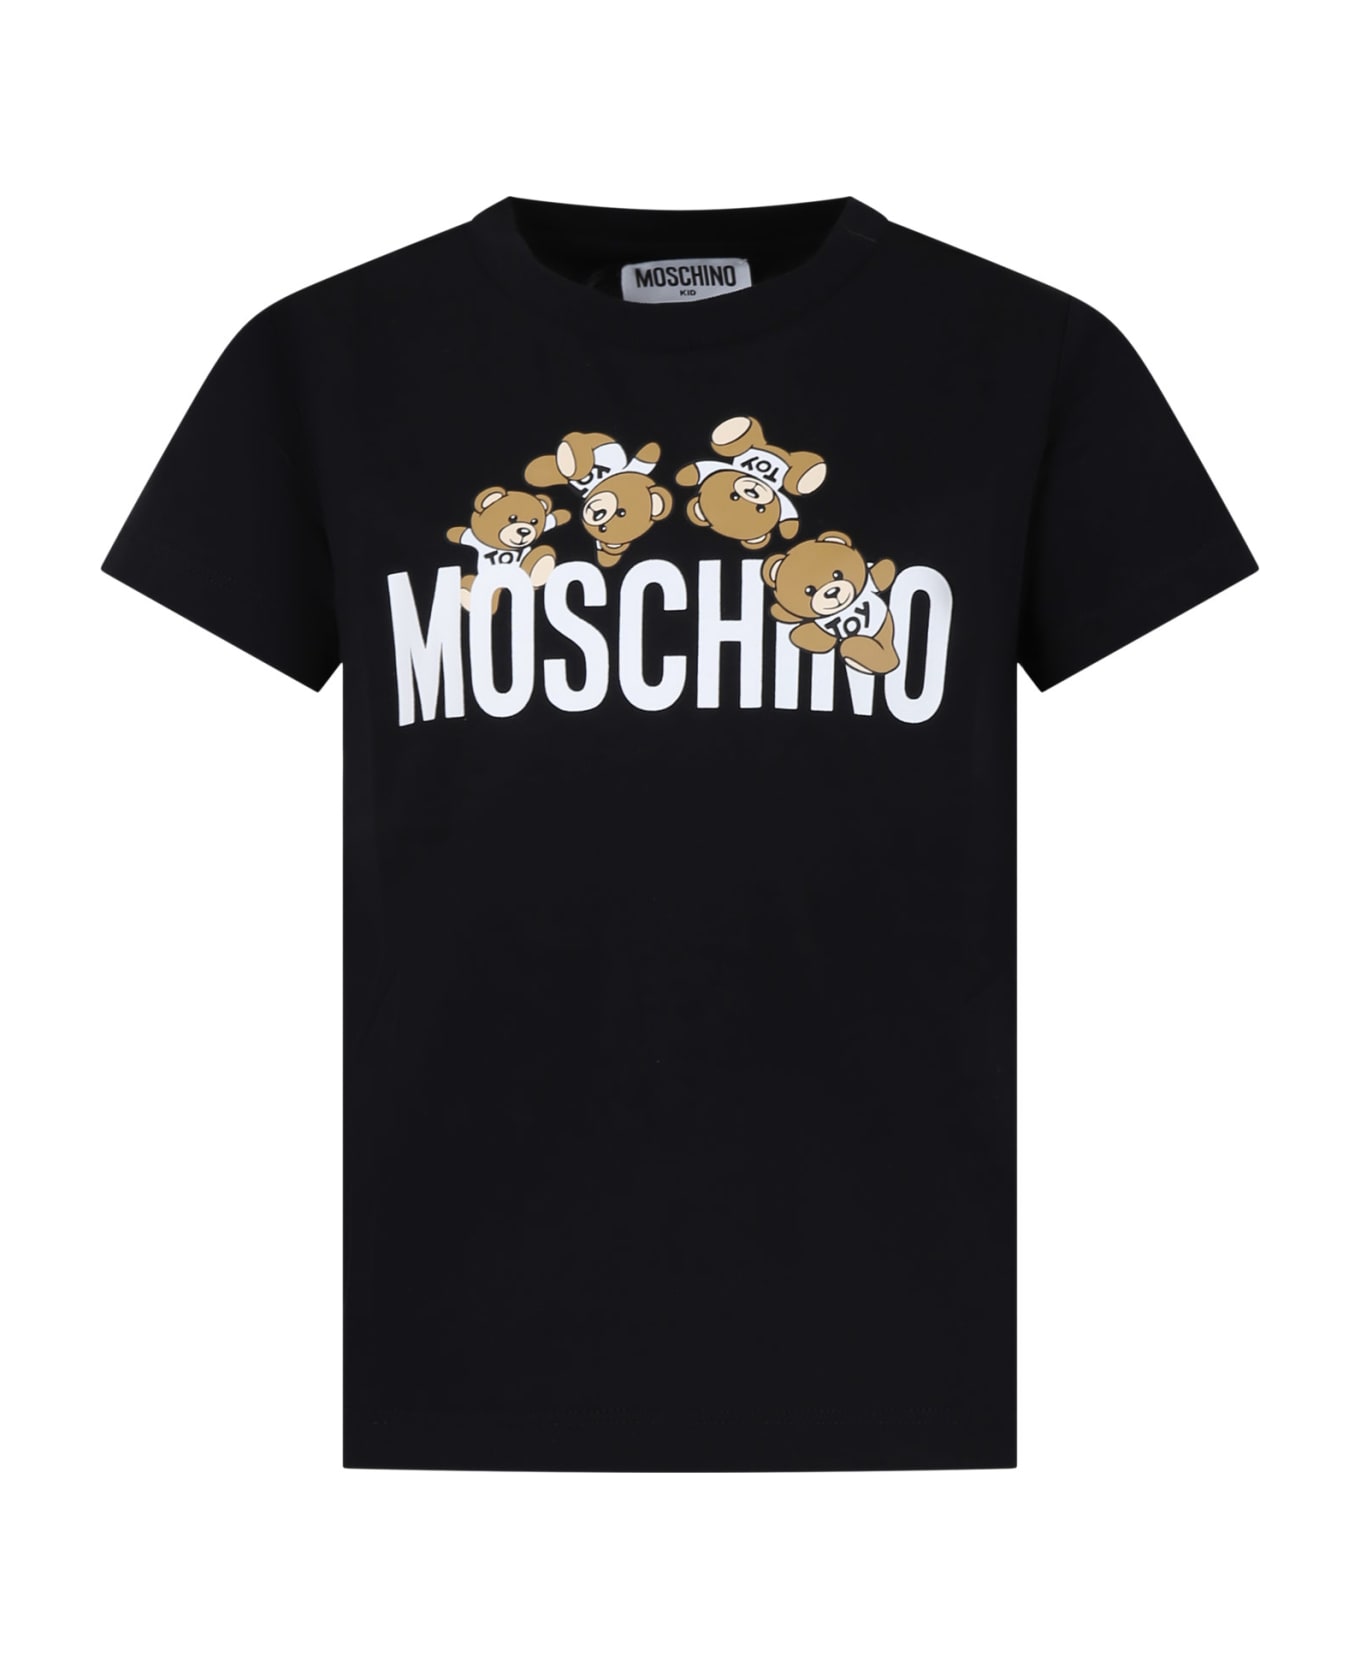 Moschino Black T-shirt For Kids With Logo And Teddy Bear - Nero